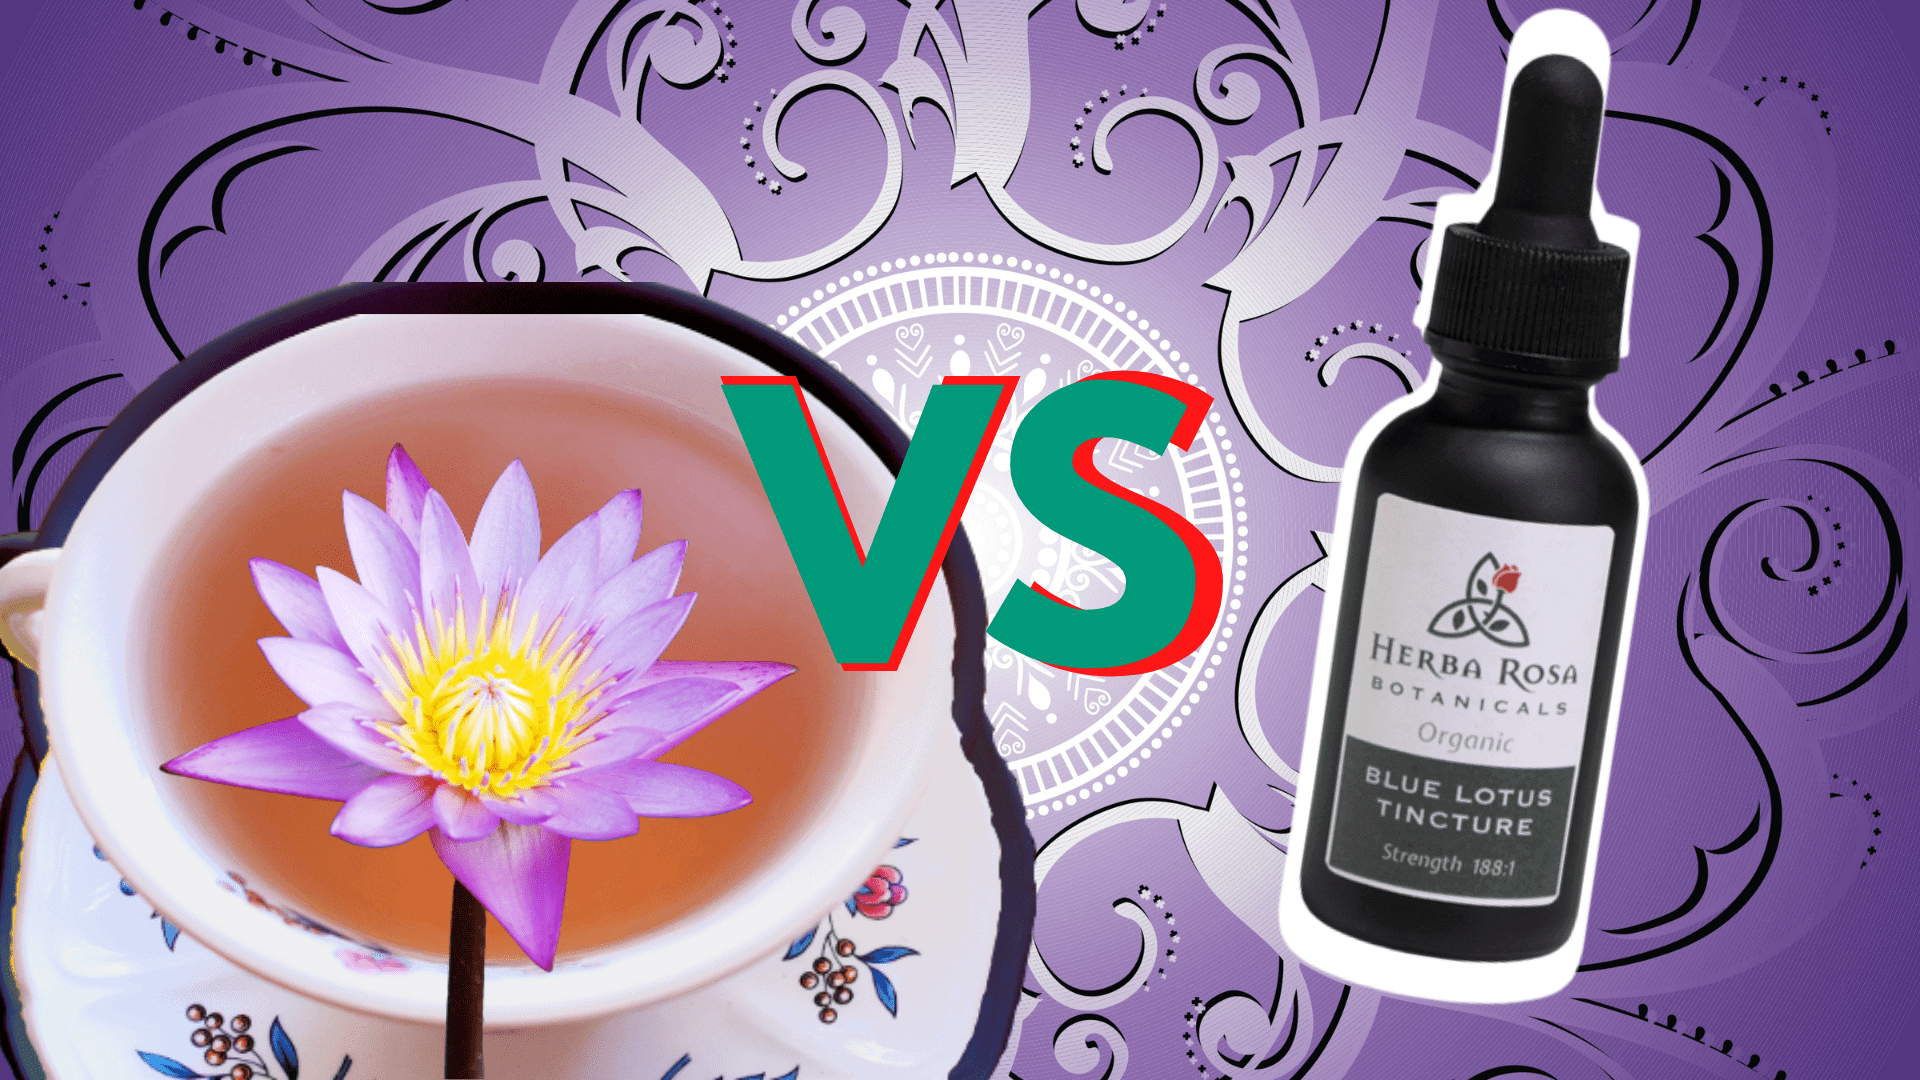 Blue Lotus tea vs Blue Lotus Tincture - which is better at helping you lucid dream easily?